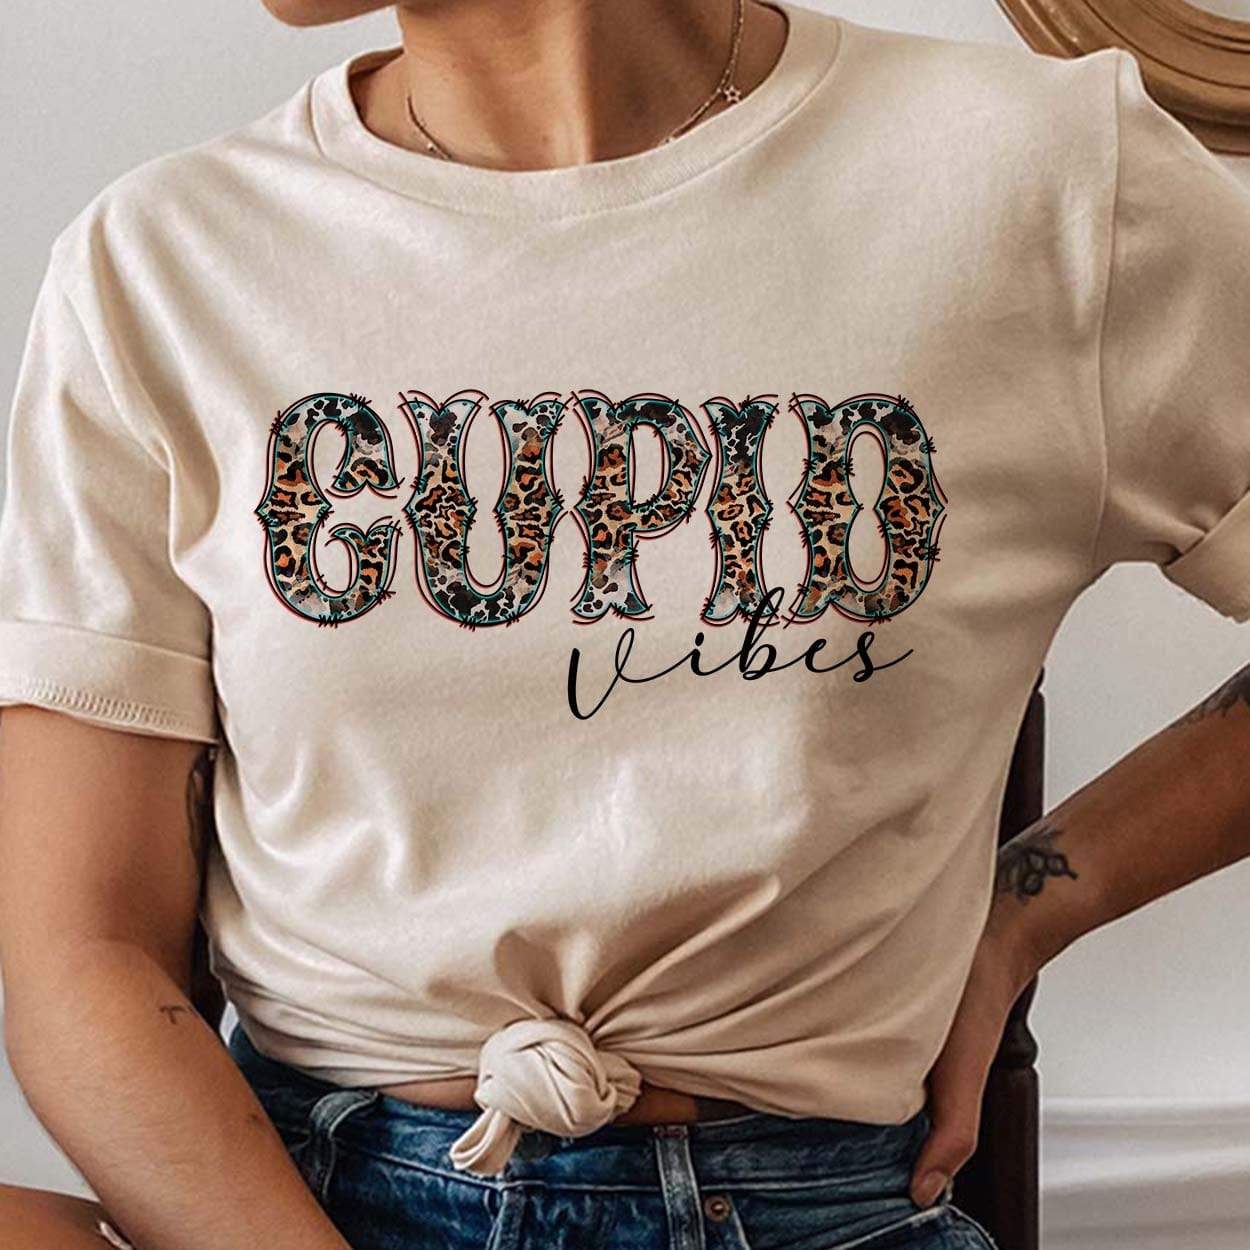 Model is wearing a cream colored tee shirt that has a front knot. The tee has a graphic that says "Cupid Vibes" in a leopard and cow print font.